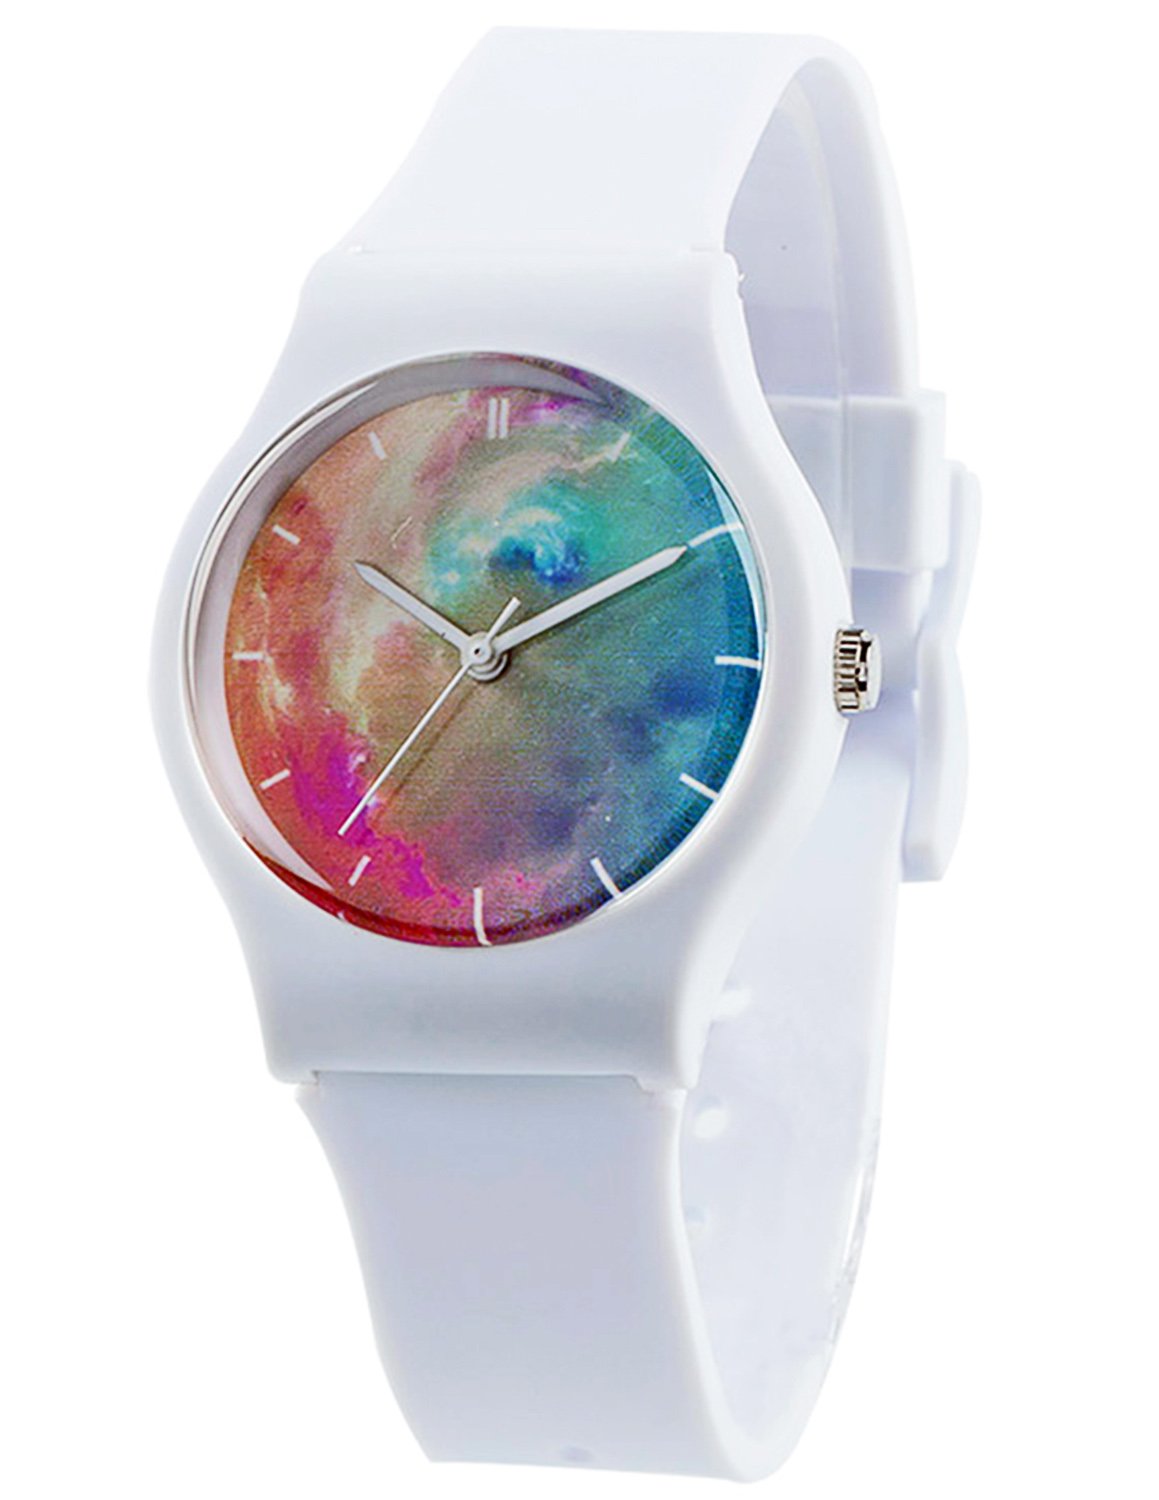 Tonnier Watches White Resin Super Soft Band Student Watches for Teenagers Young Girls Watches Nebula